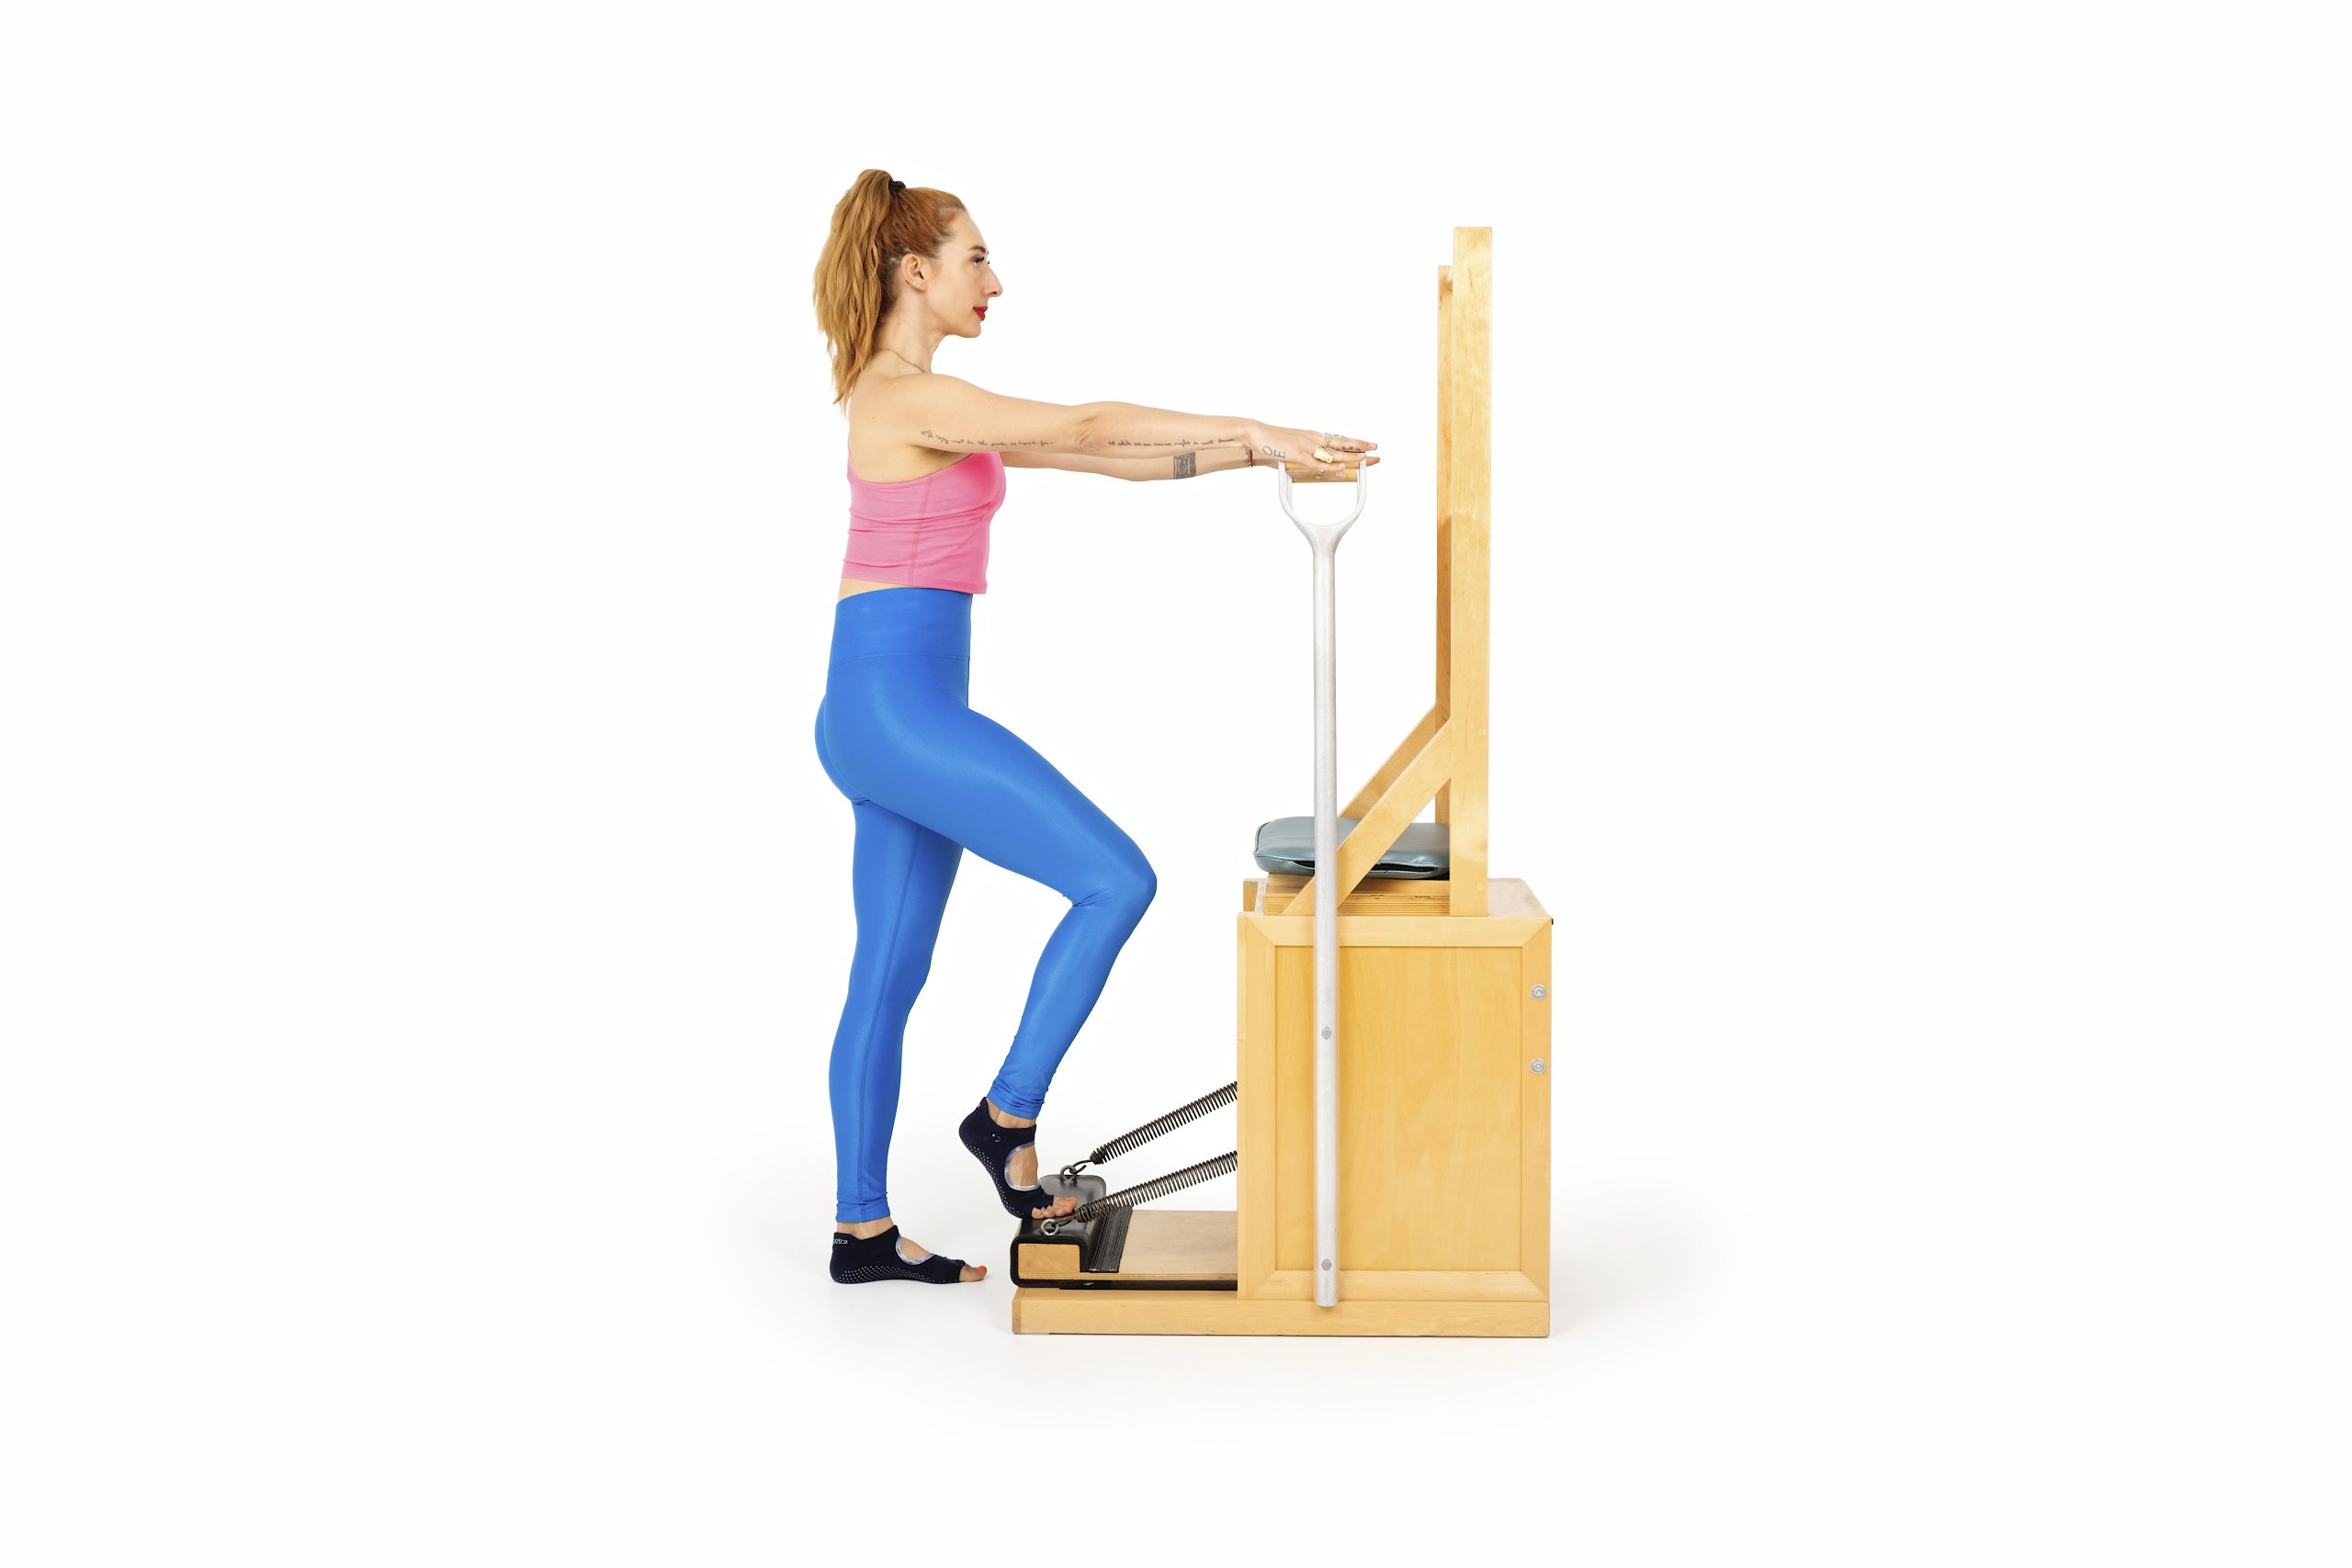 press down front on the high chair online pilates classes